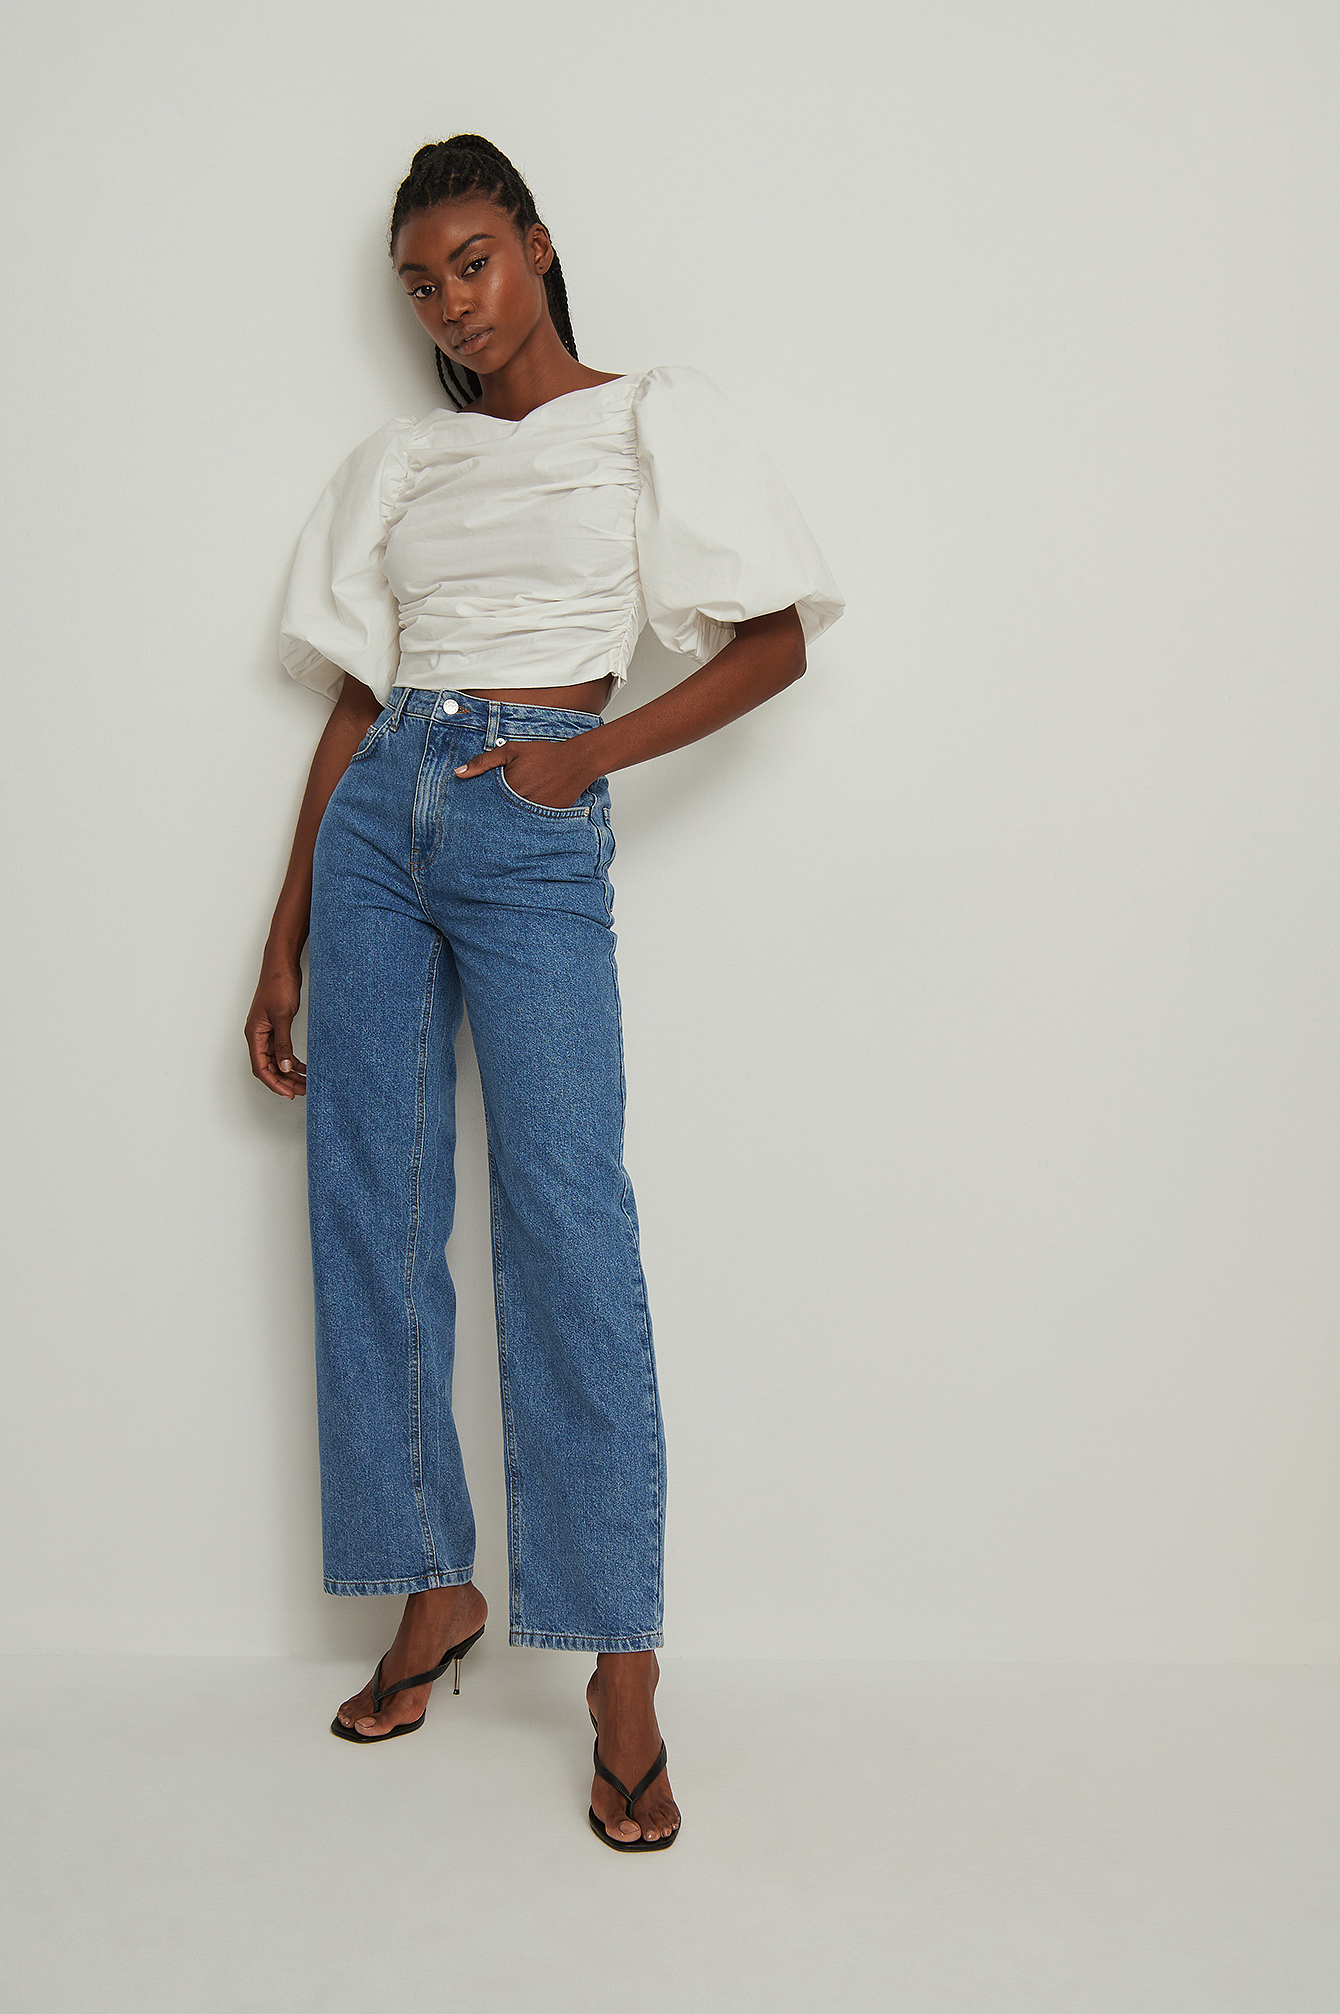 Gathered Front Cotton Top Outfit